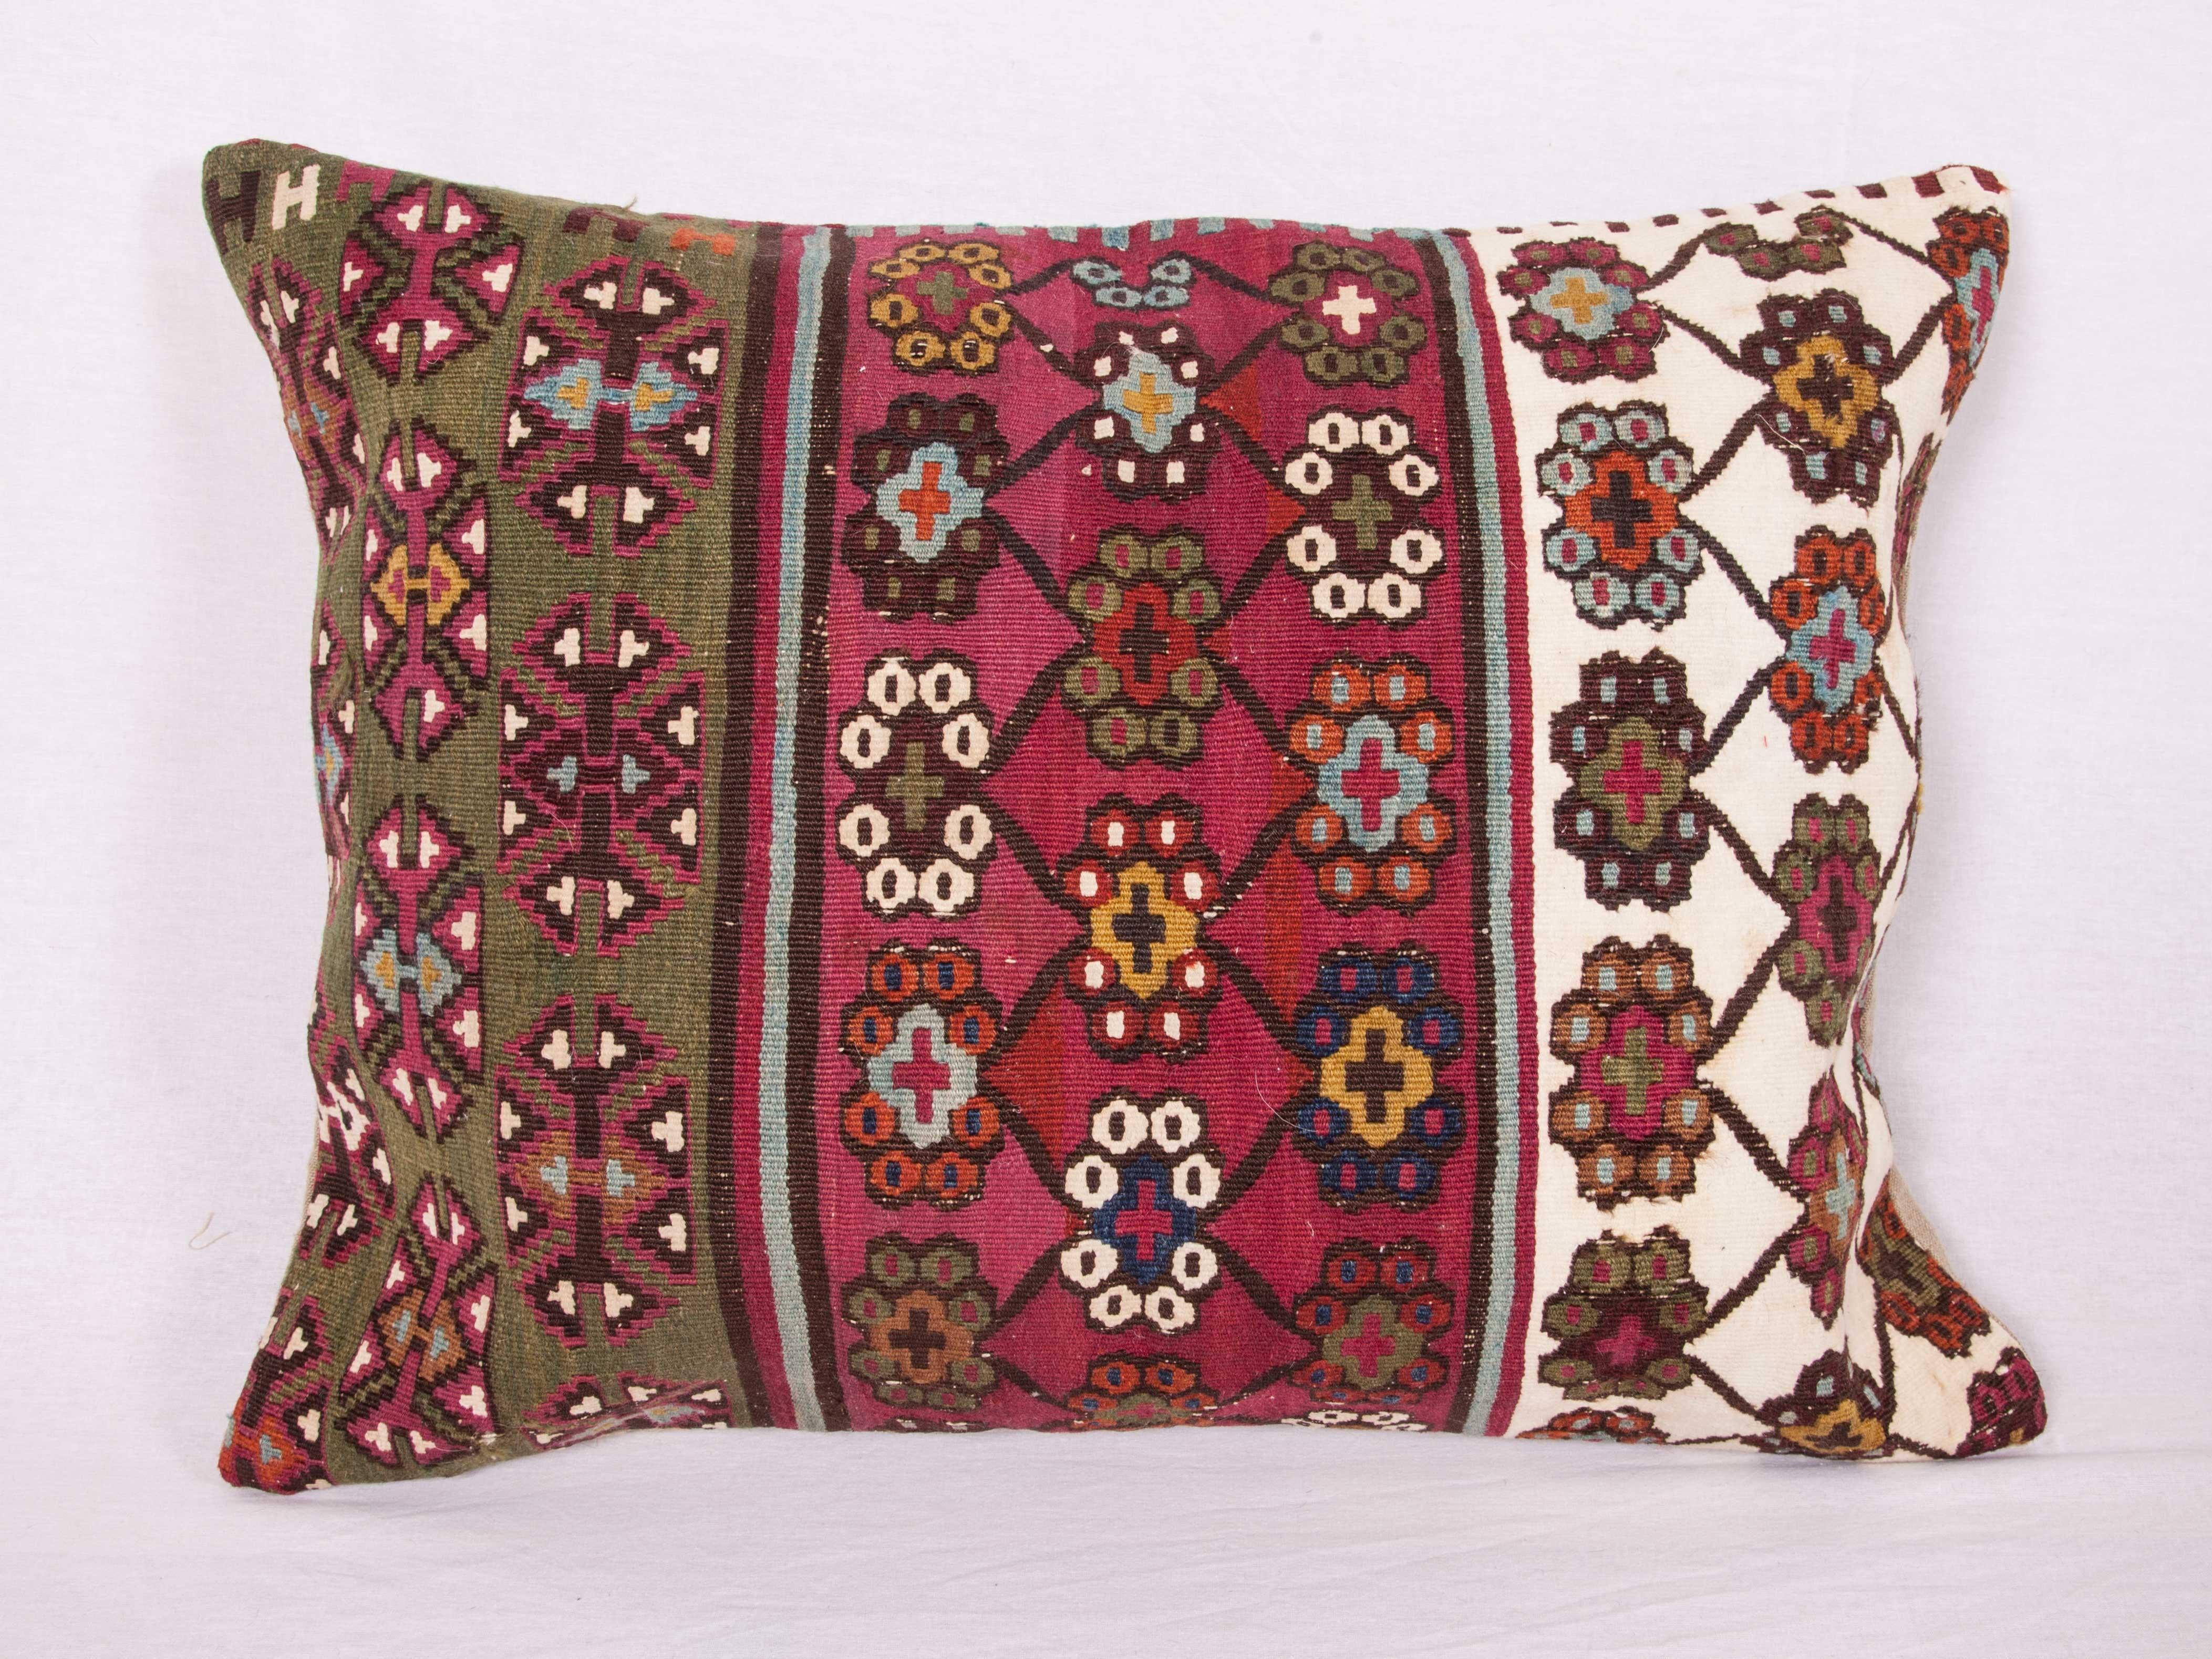 Hand-Woven Antique Kilim Cuschion Covers Fashioned from Late 19th Century Turkish Kilim